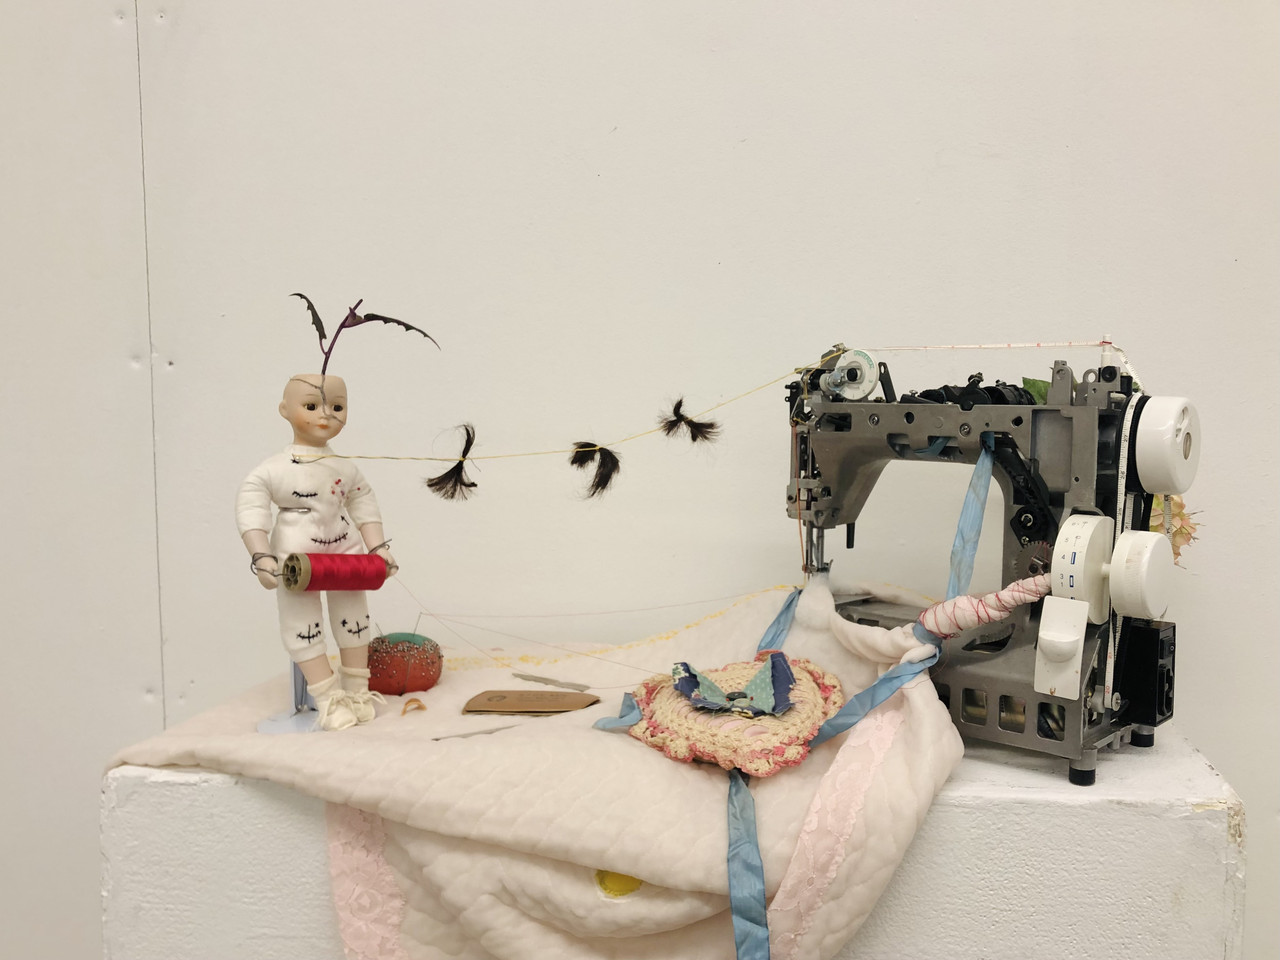 A baby doll covered in black stitches holds a spool of red thread while standing on a light pink blanket. Sewing supplies are strewn across the blanket. To the right is a sewing machine with no outer casing.